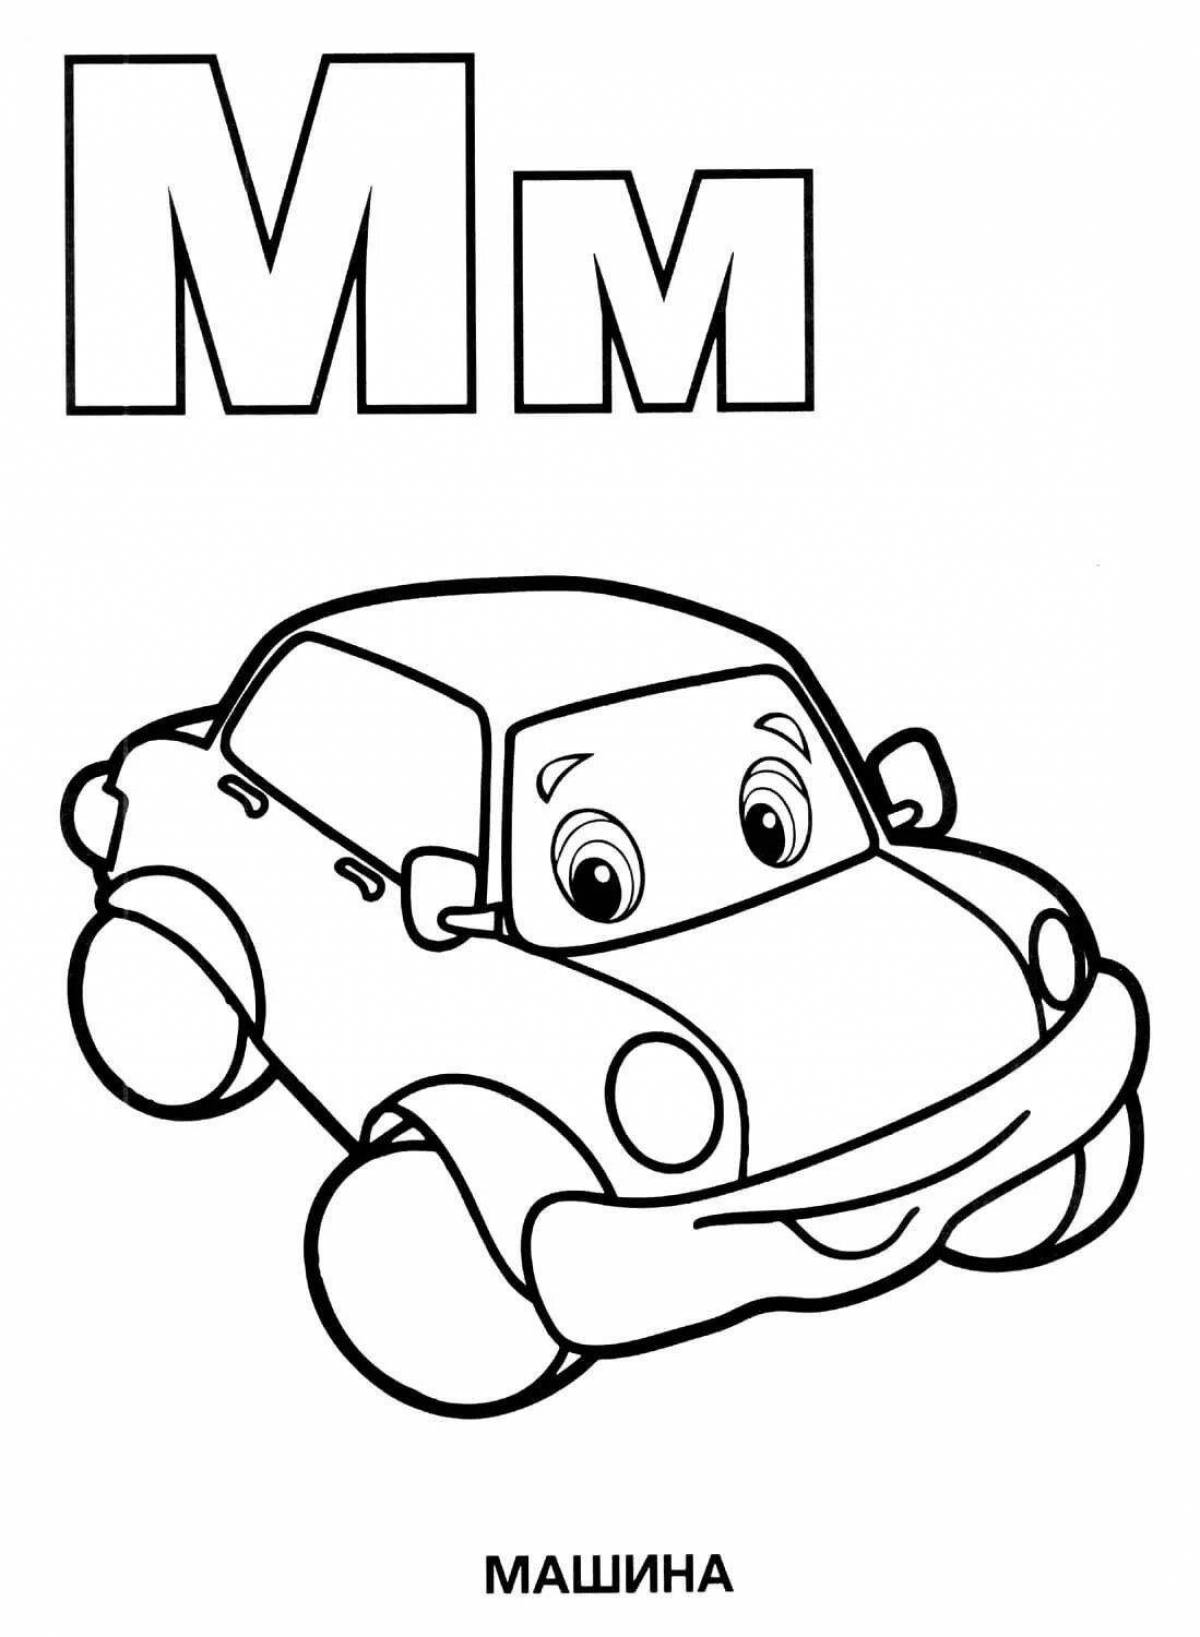 Colorful letter m coloring book for preschoolers